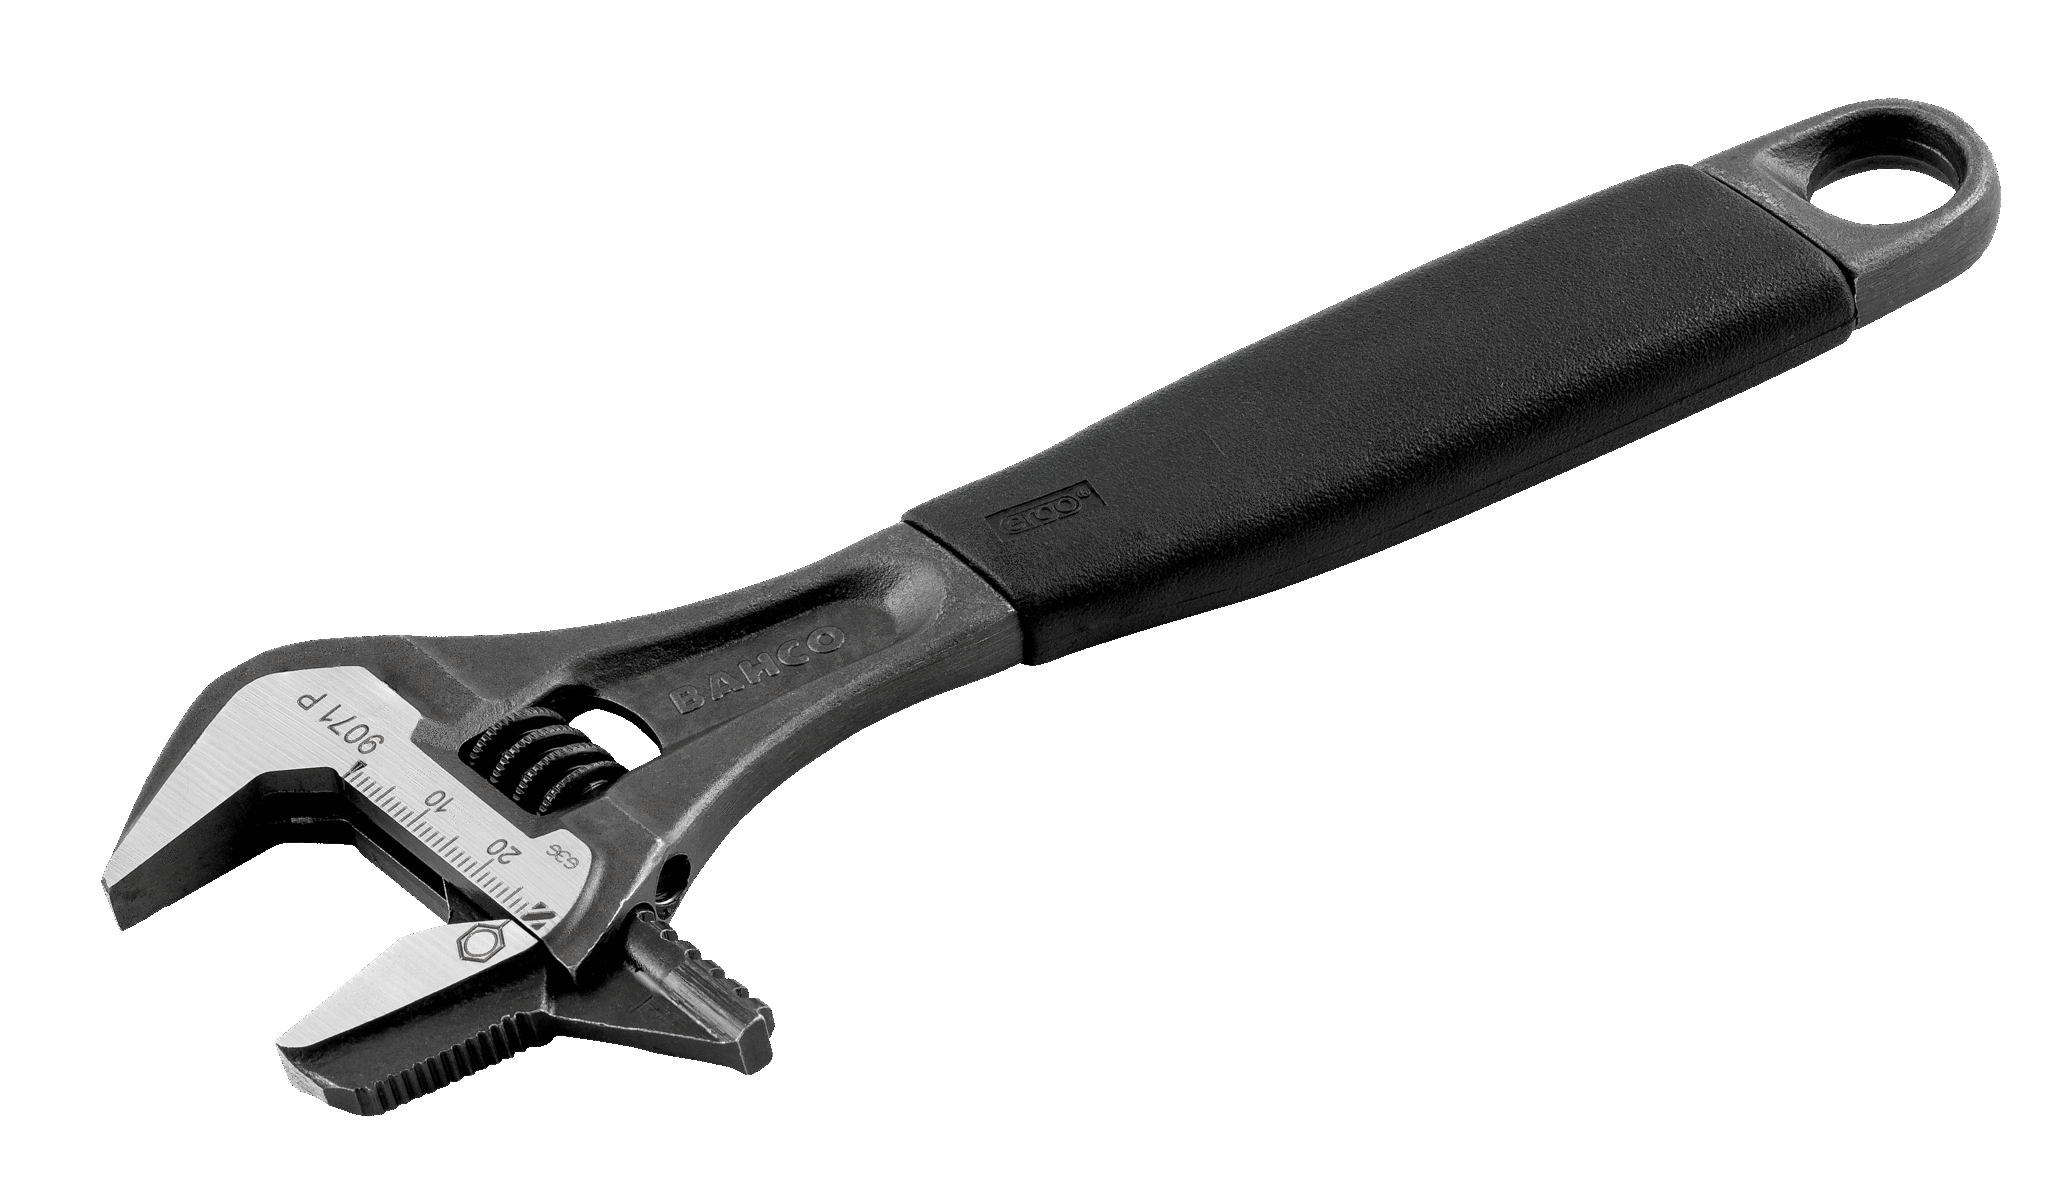 ERGO™ rubber handle central nut phosphated adjustable wrench, with reversible jaw - 9070 P by Bahco